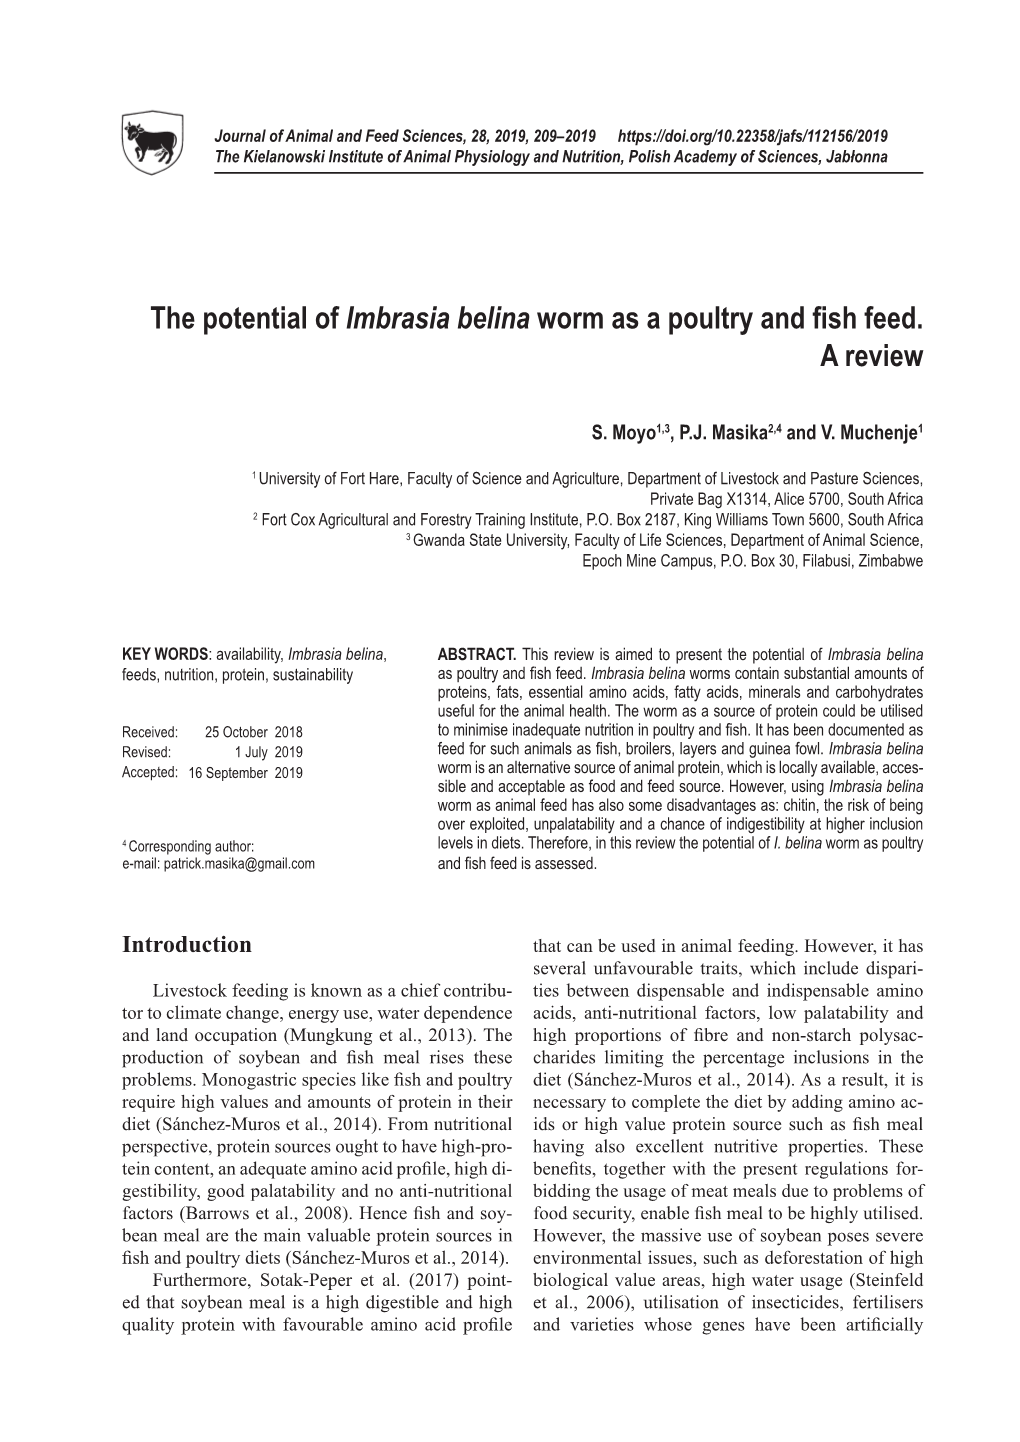 The Potential of Imbrasia Belina Worm As a Poultry and Fish Feed. a Review